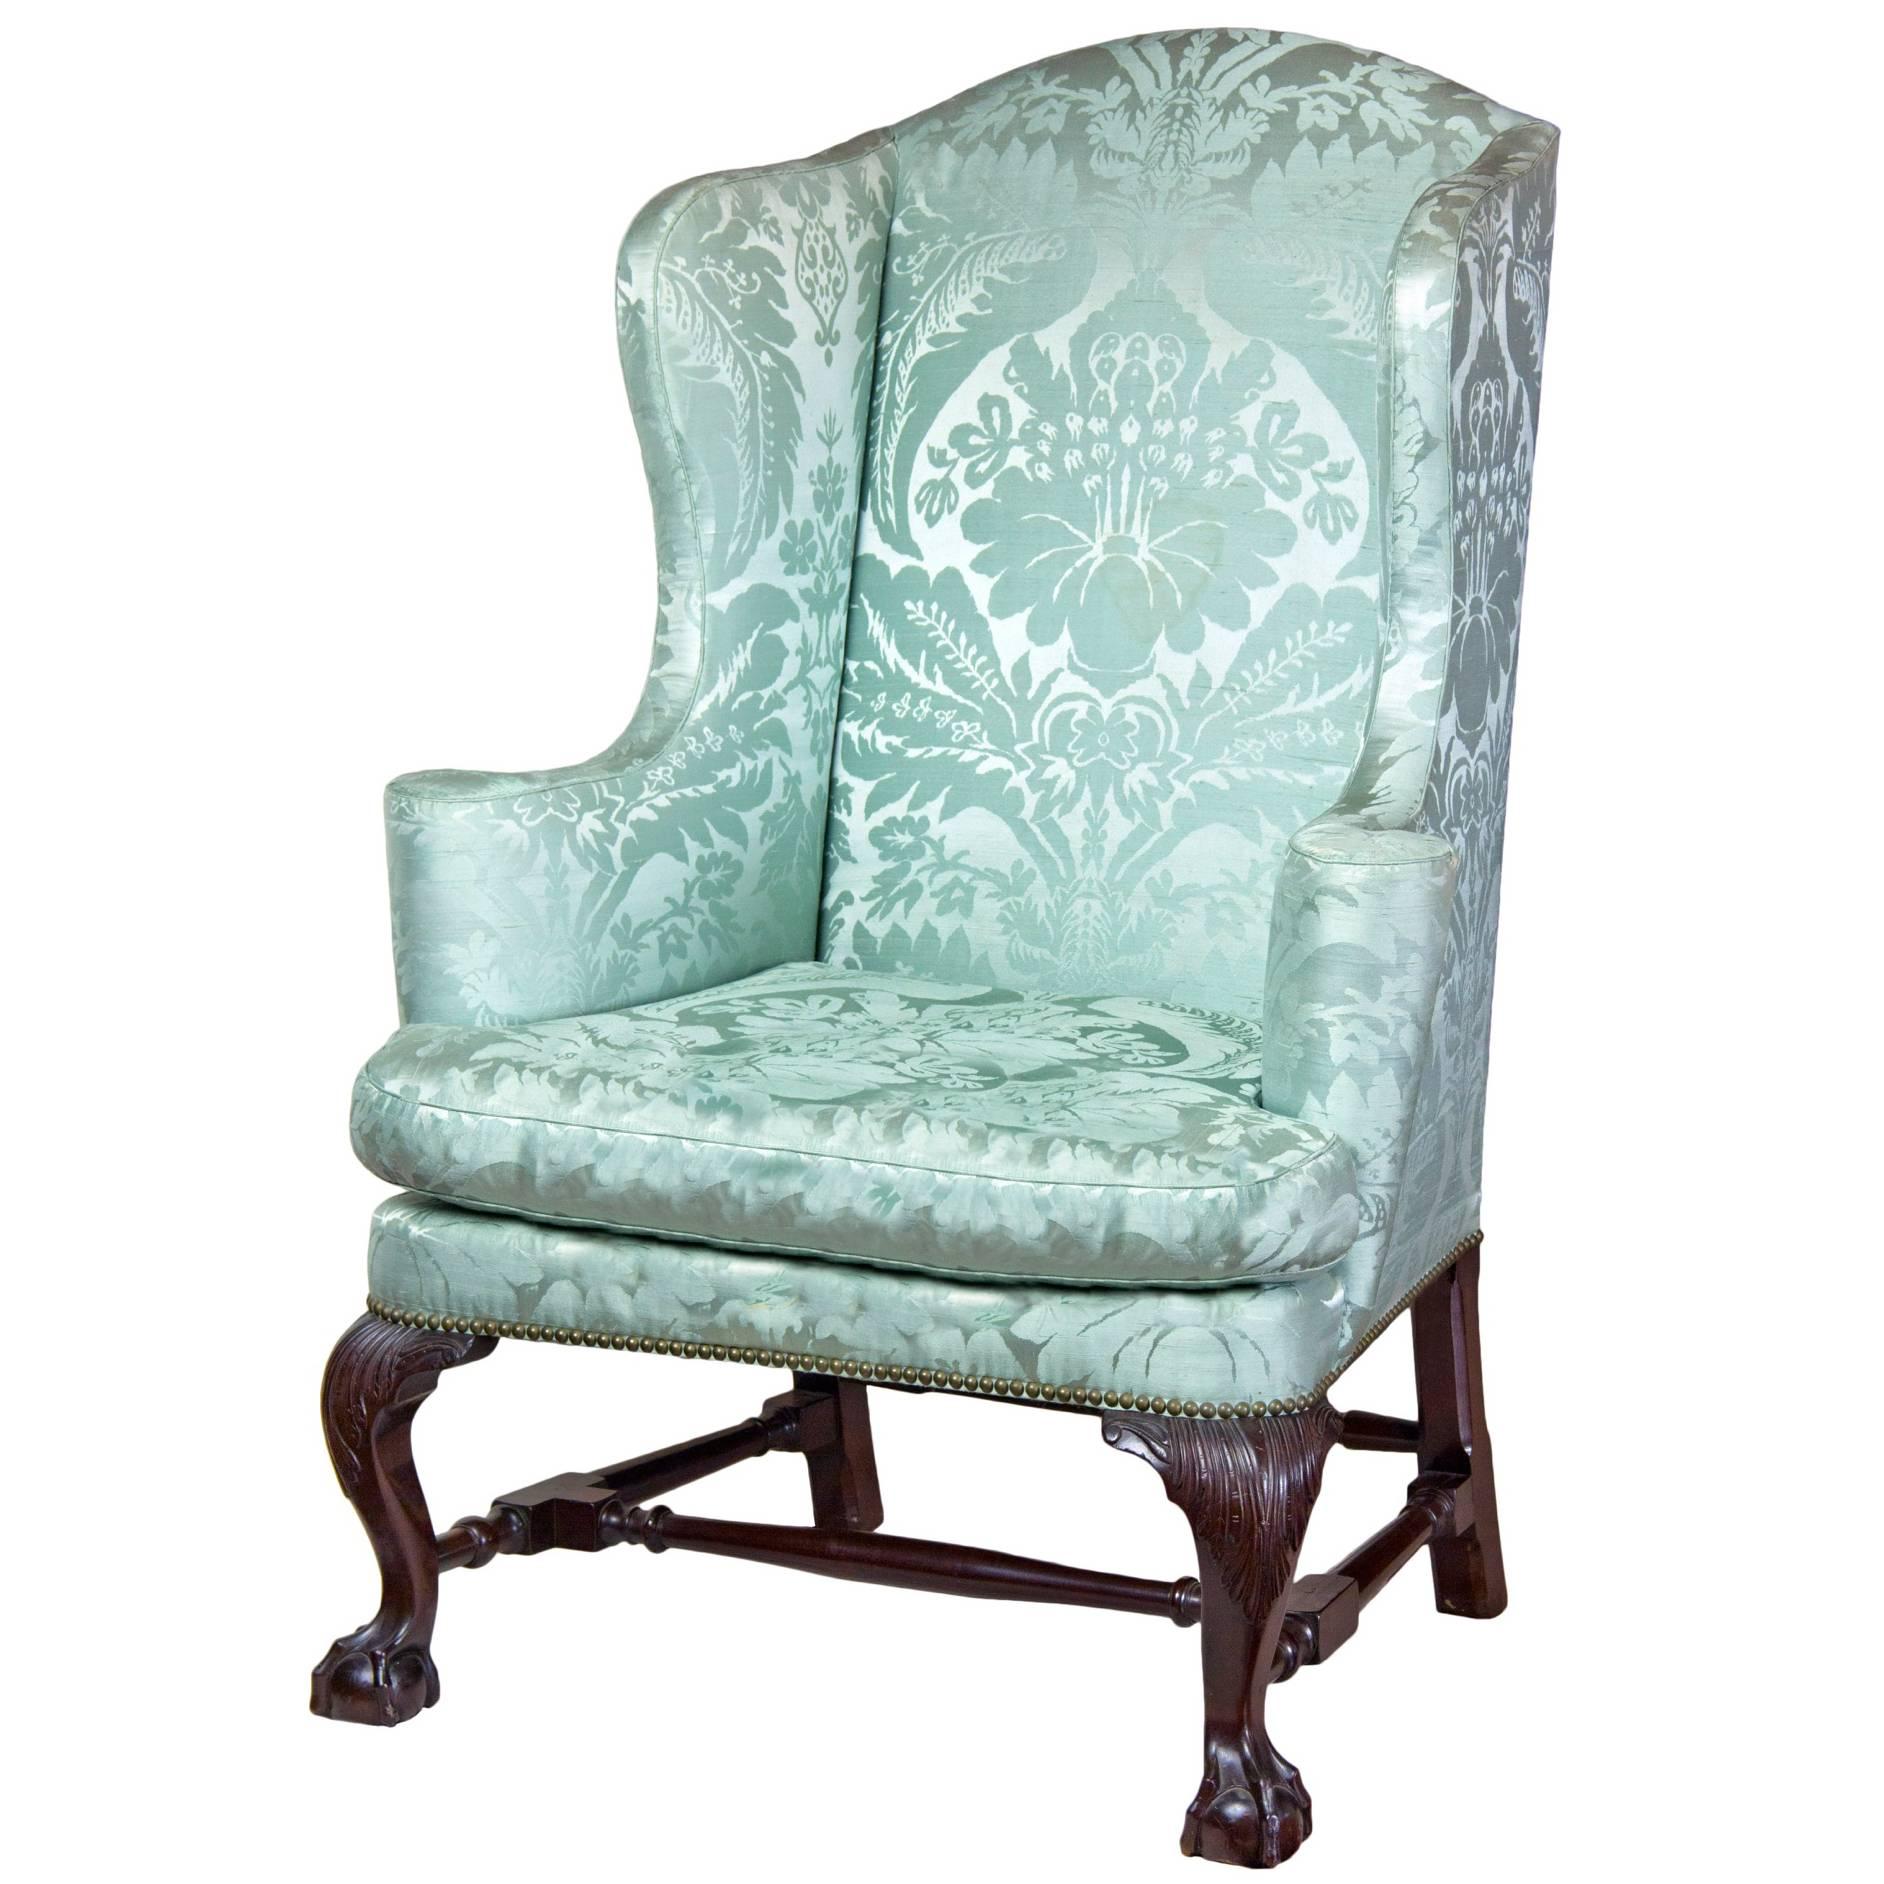 Upholstered Wing Chair with Carved Knees and Claw and Ball Feet, Boston